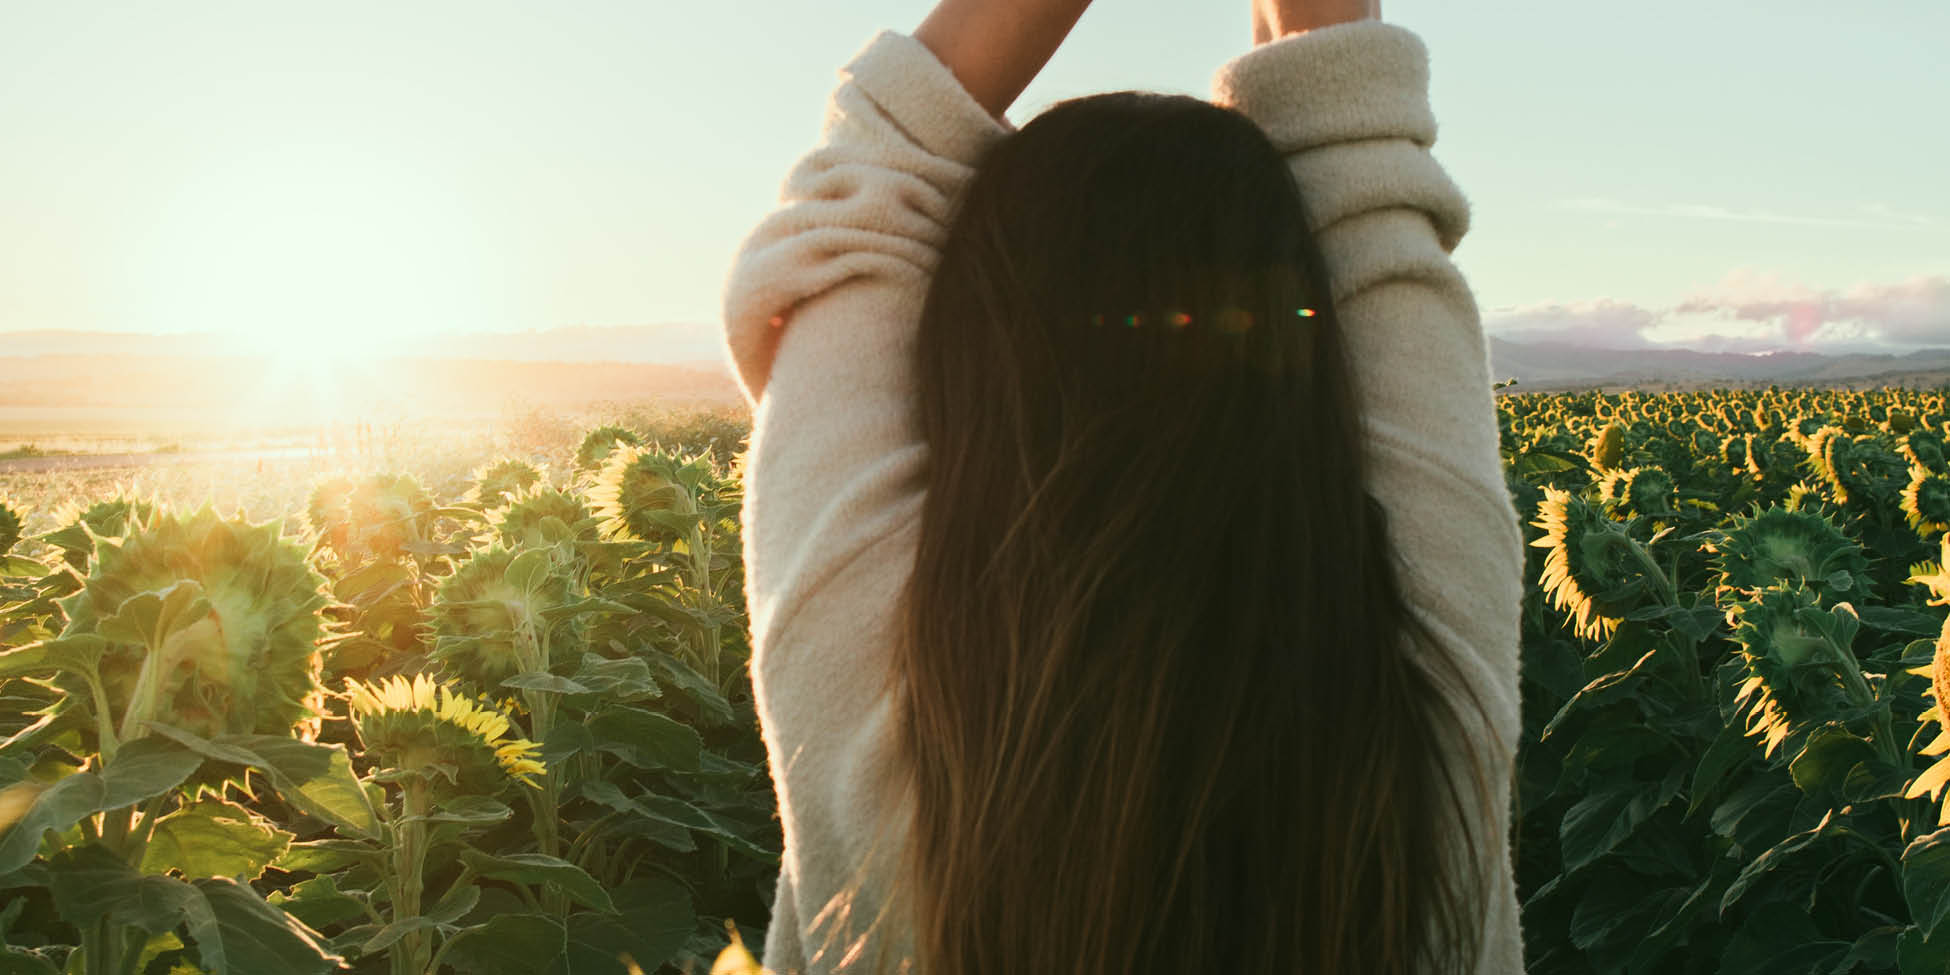 woman stretches arms above head in field of sunflowers